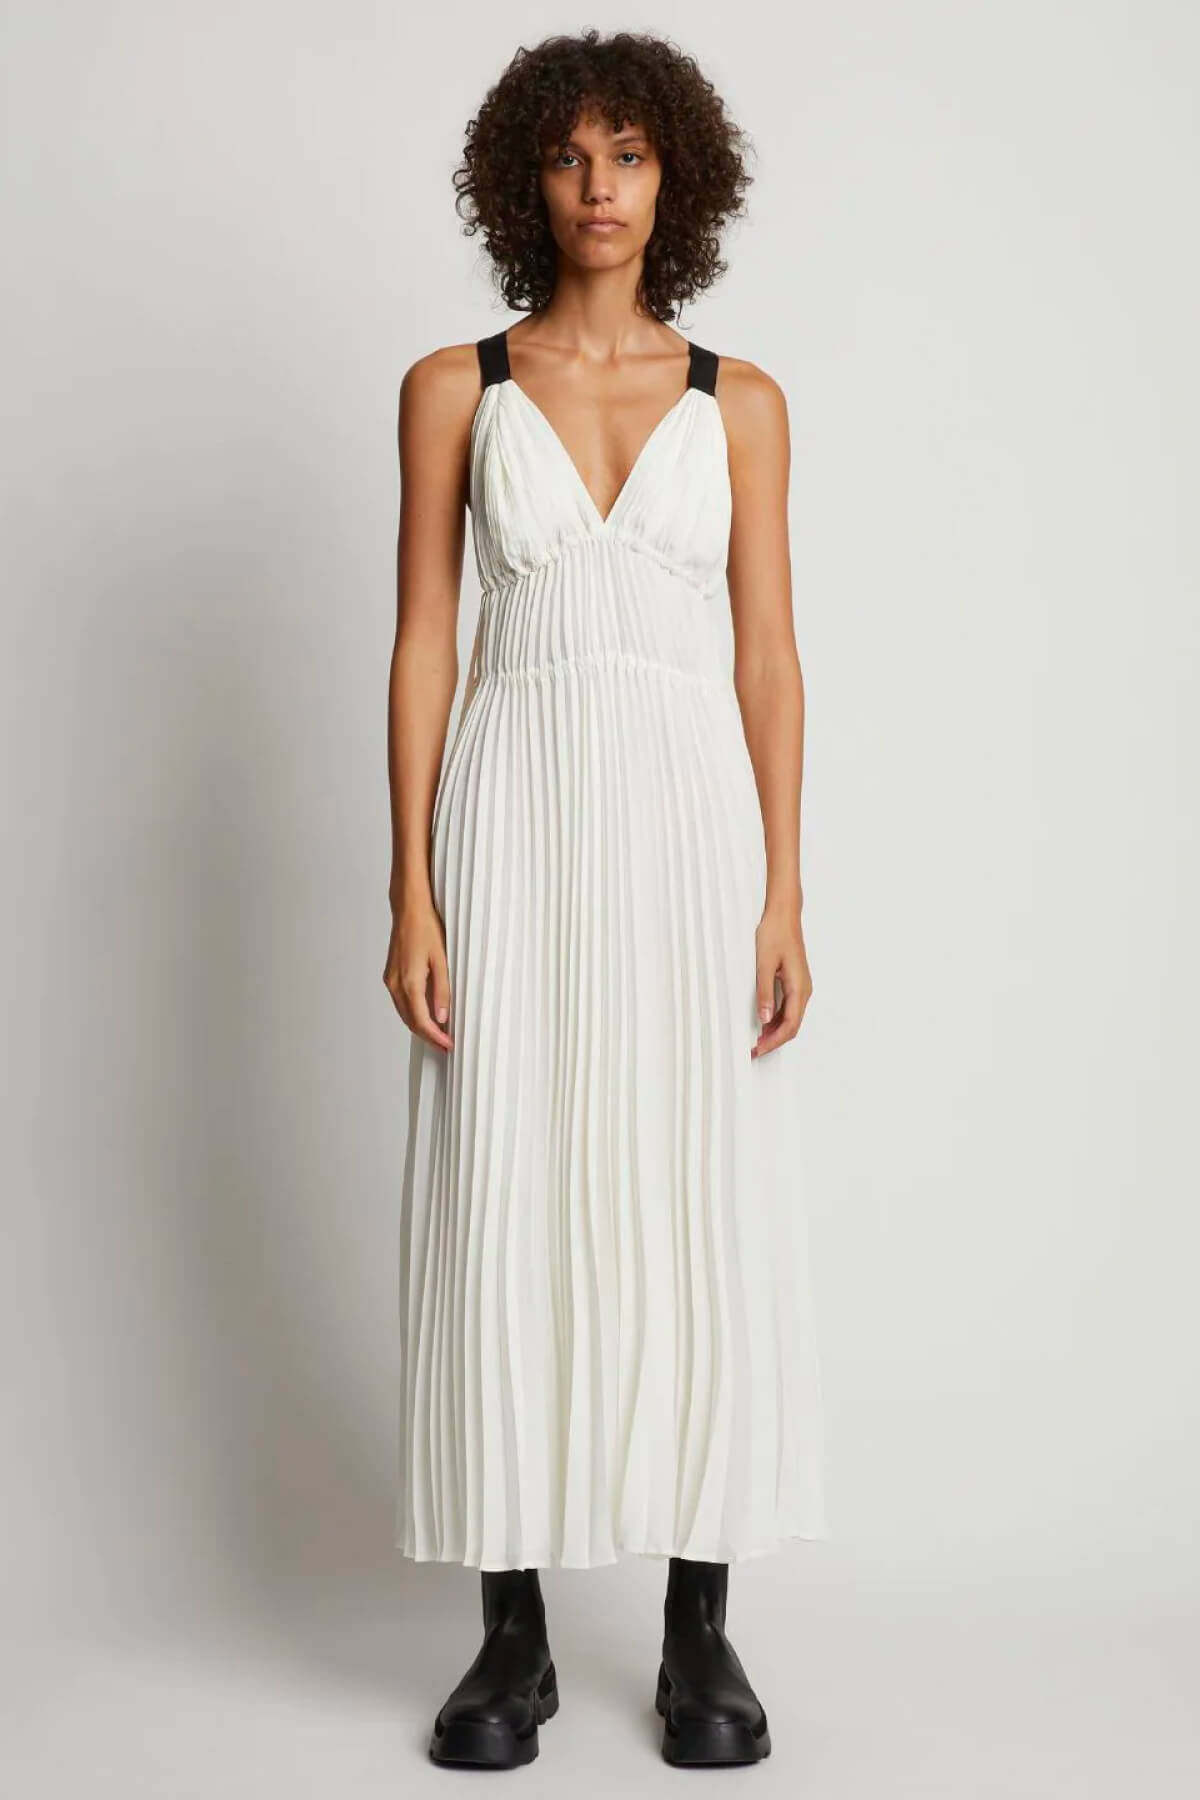 Proenza Schouler White Label Broomstick Pleated Tank Dress - Off White